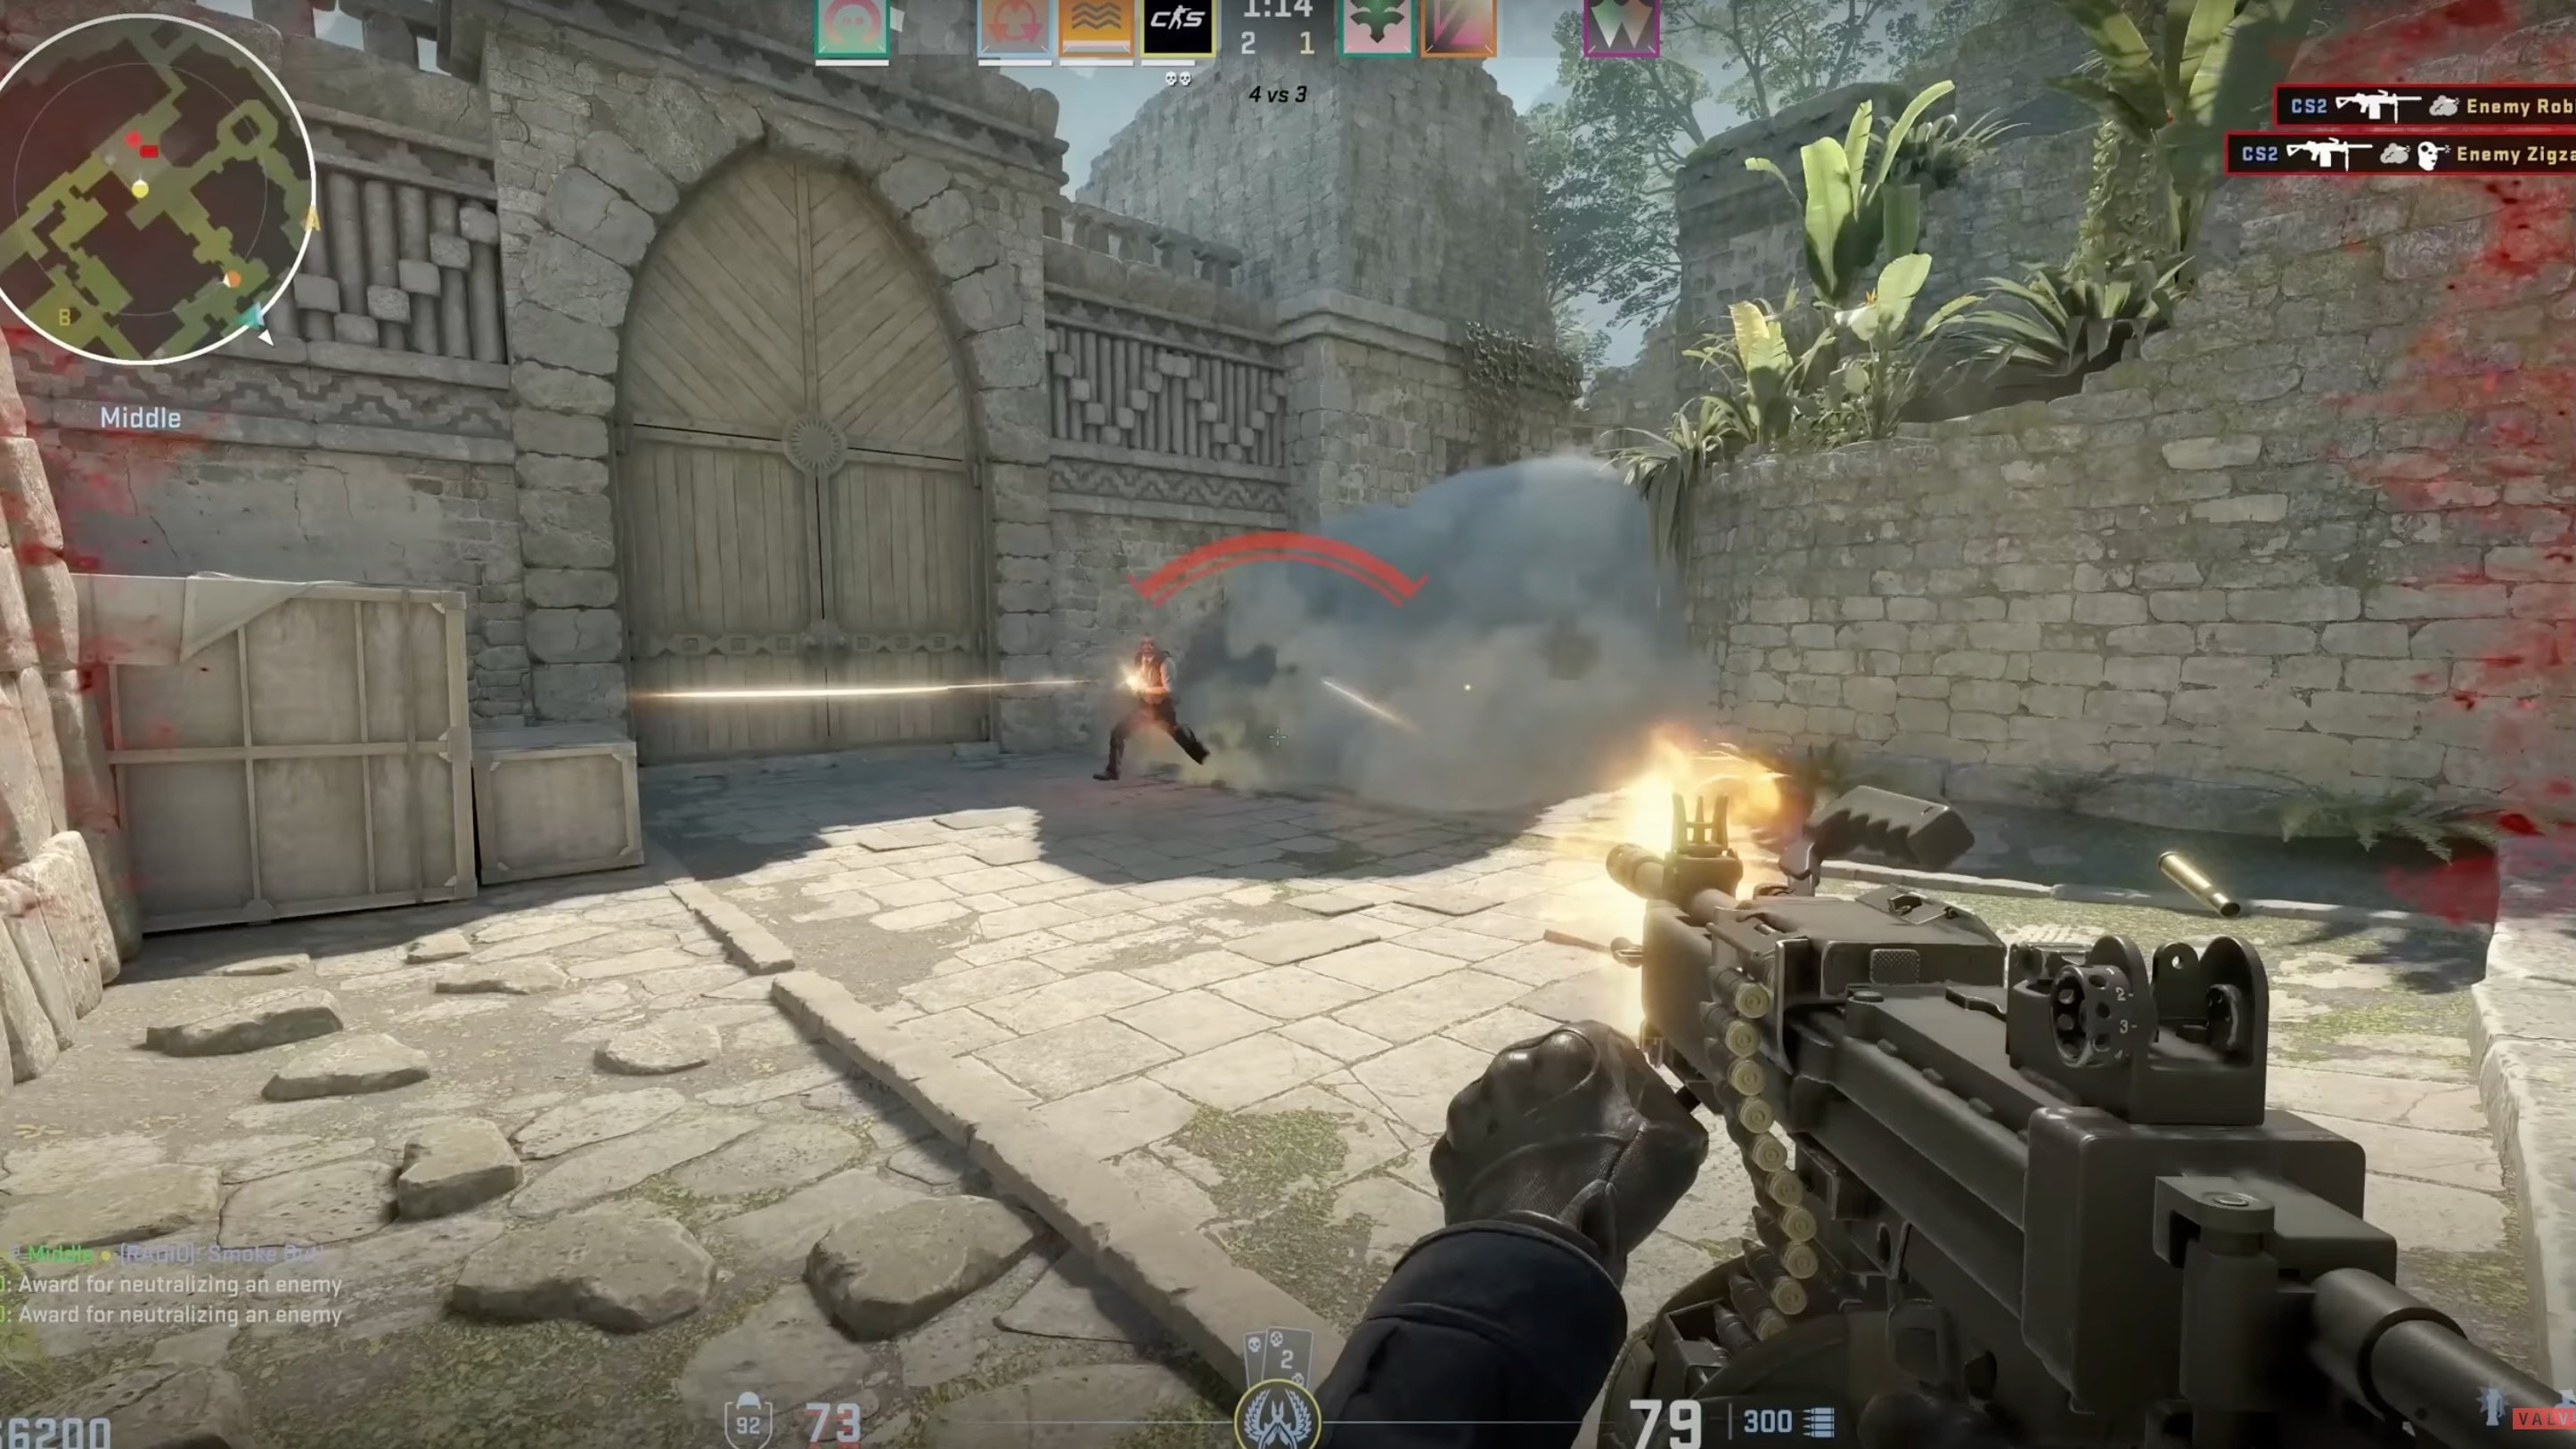 Counter-Strike 2 Limited Test End Date: When Does the CS2 Beta Finish? -  GameRevolution